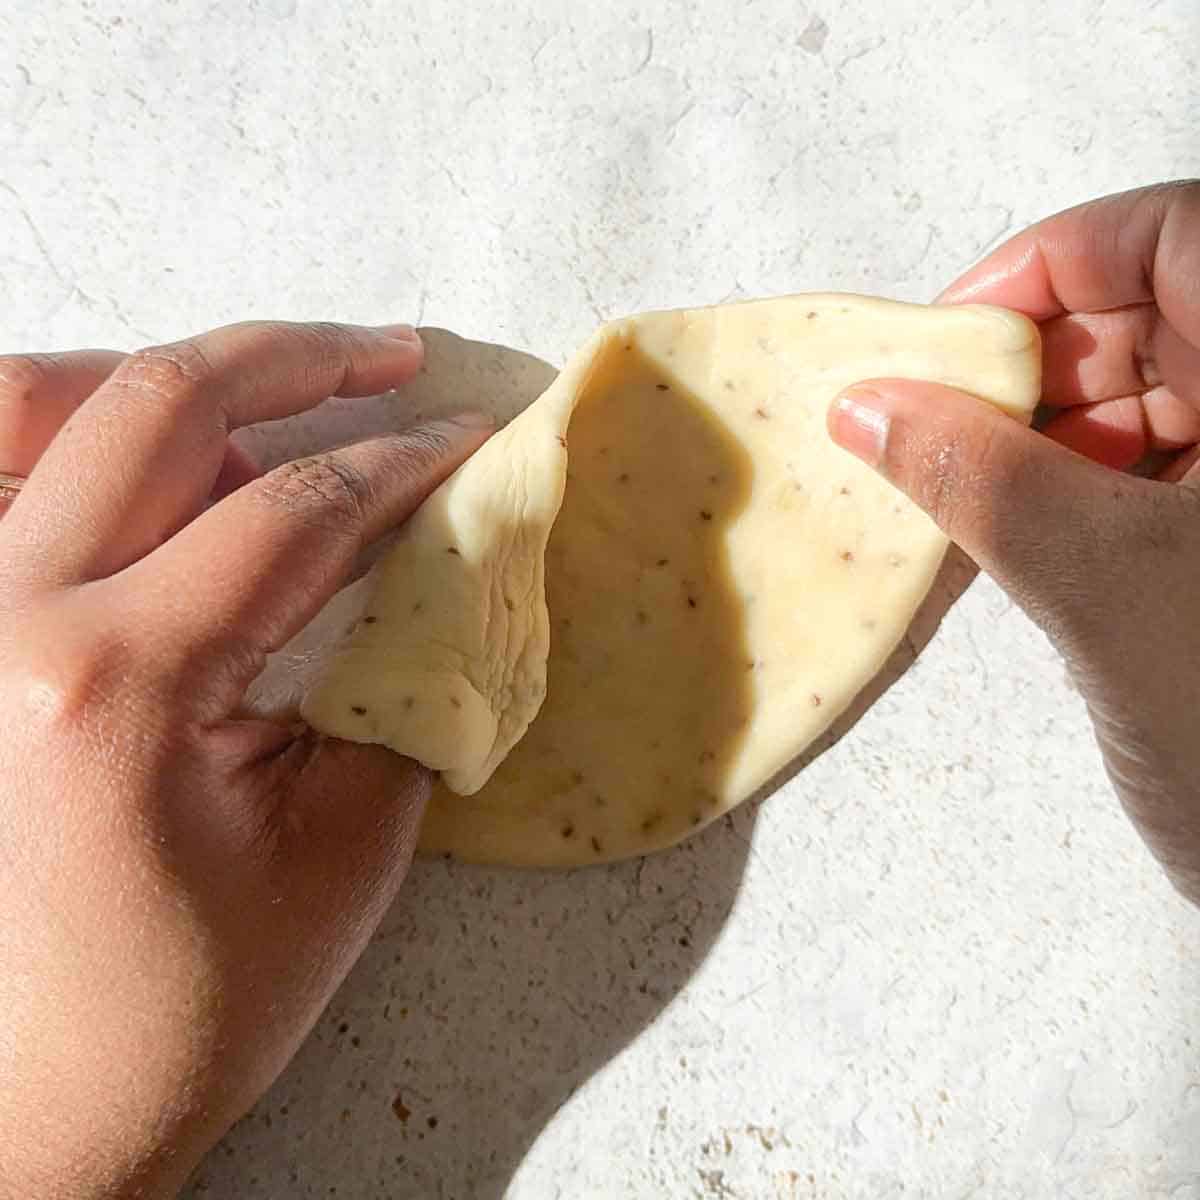 Samosa dough being shaped into a cone